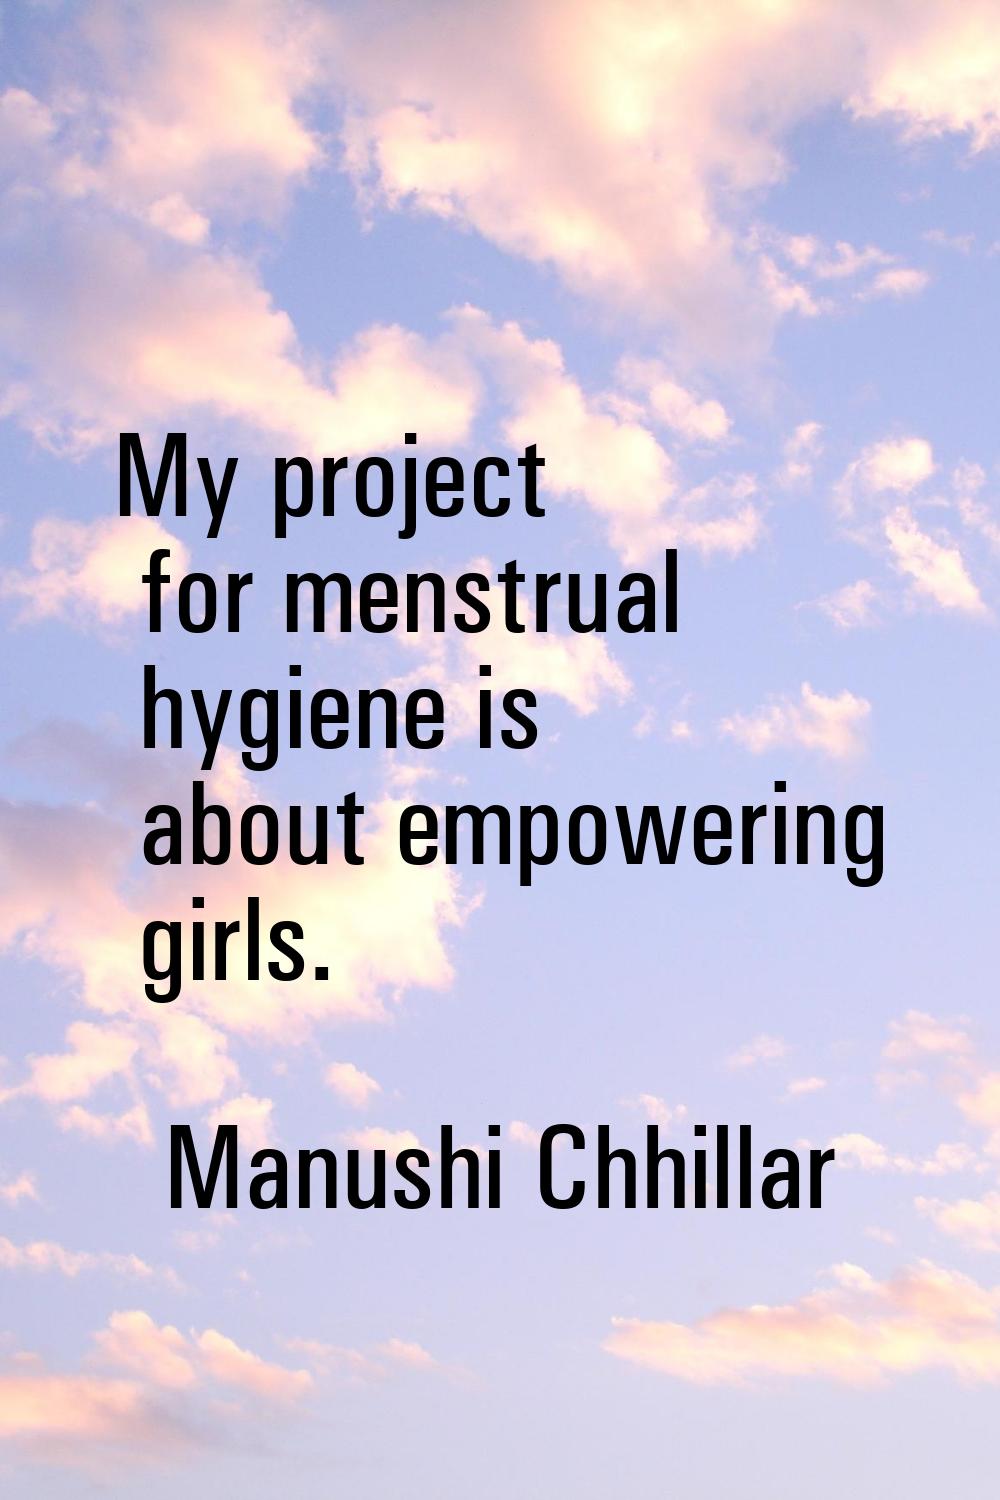 My project for menstrual hygiene is about empowering girls.